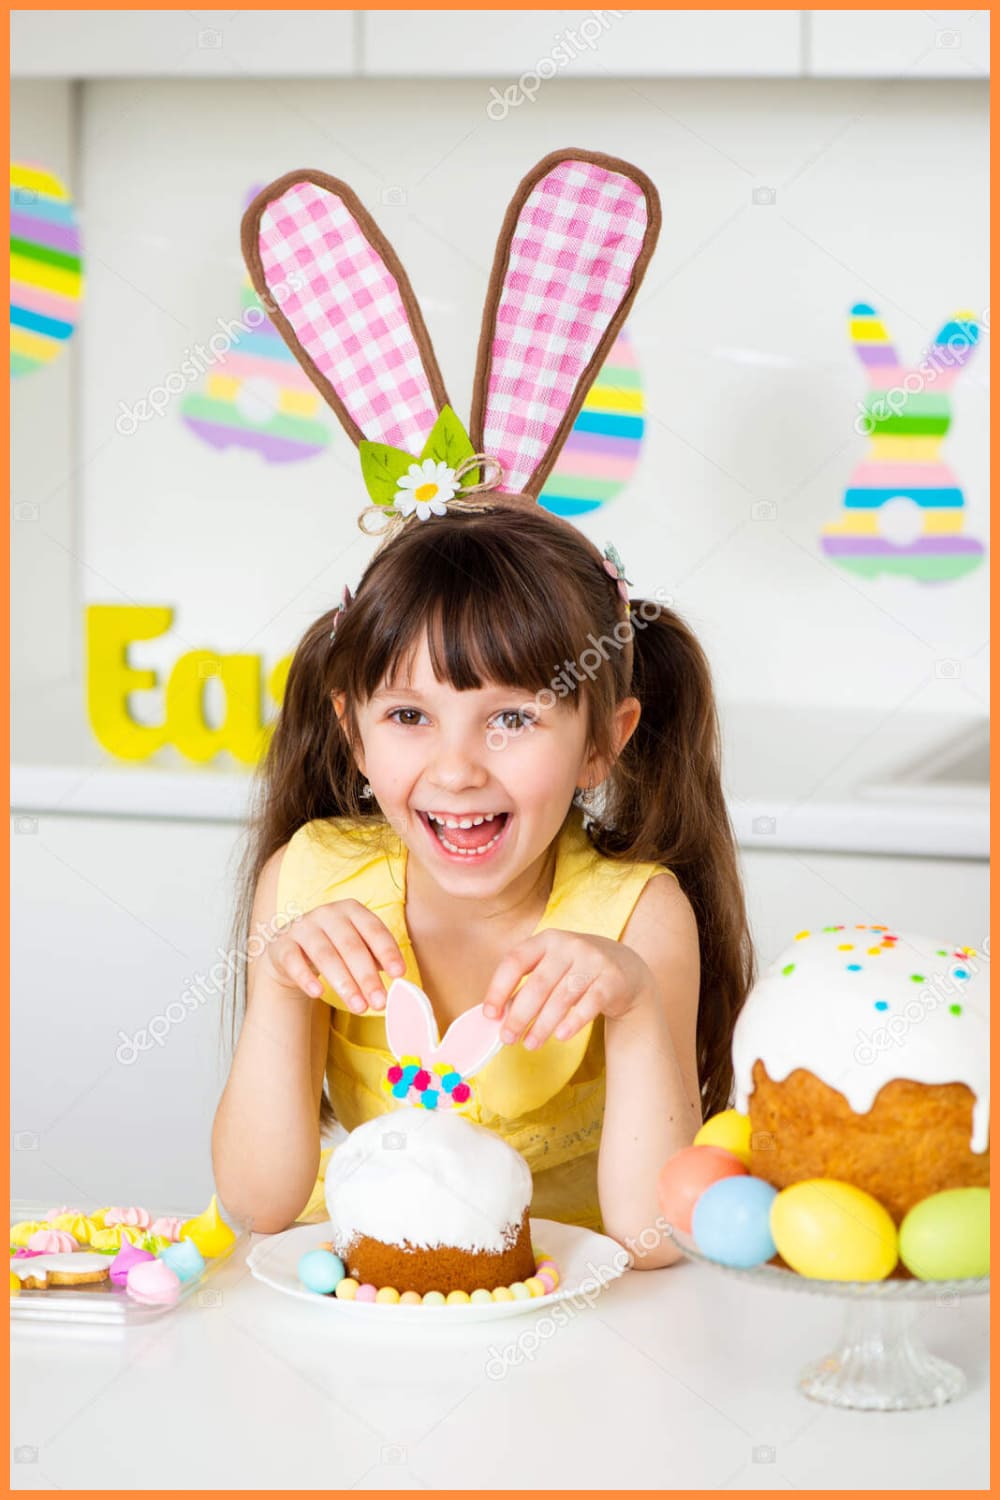 A cute smiling little girl with bunny ears prepares an Easter cake and painted eggs.